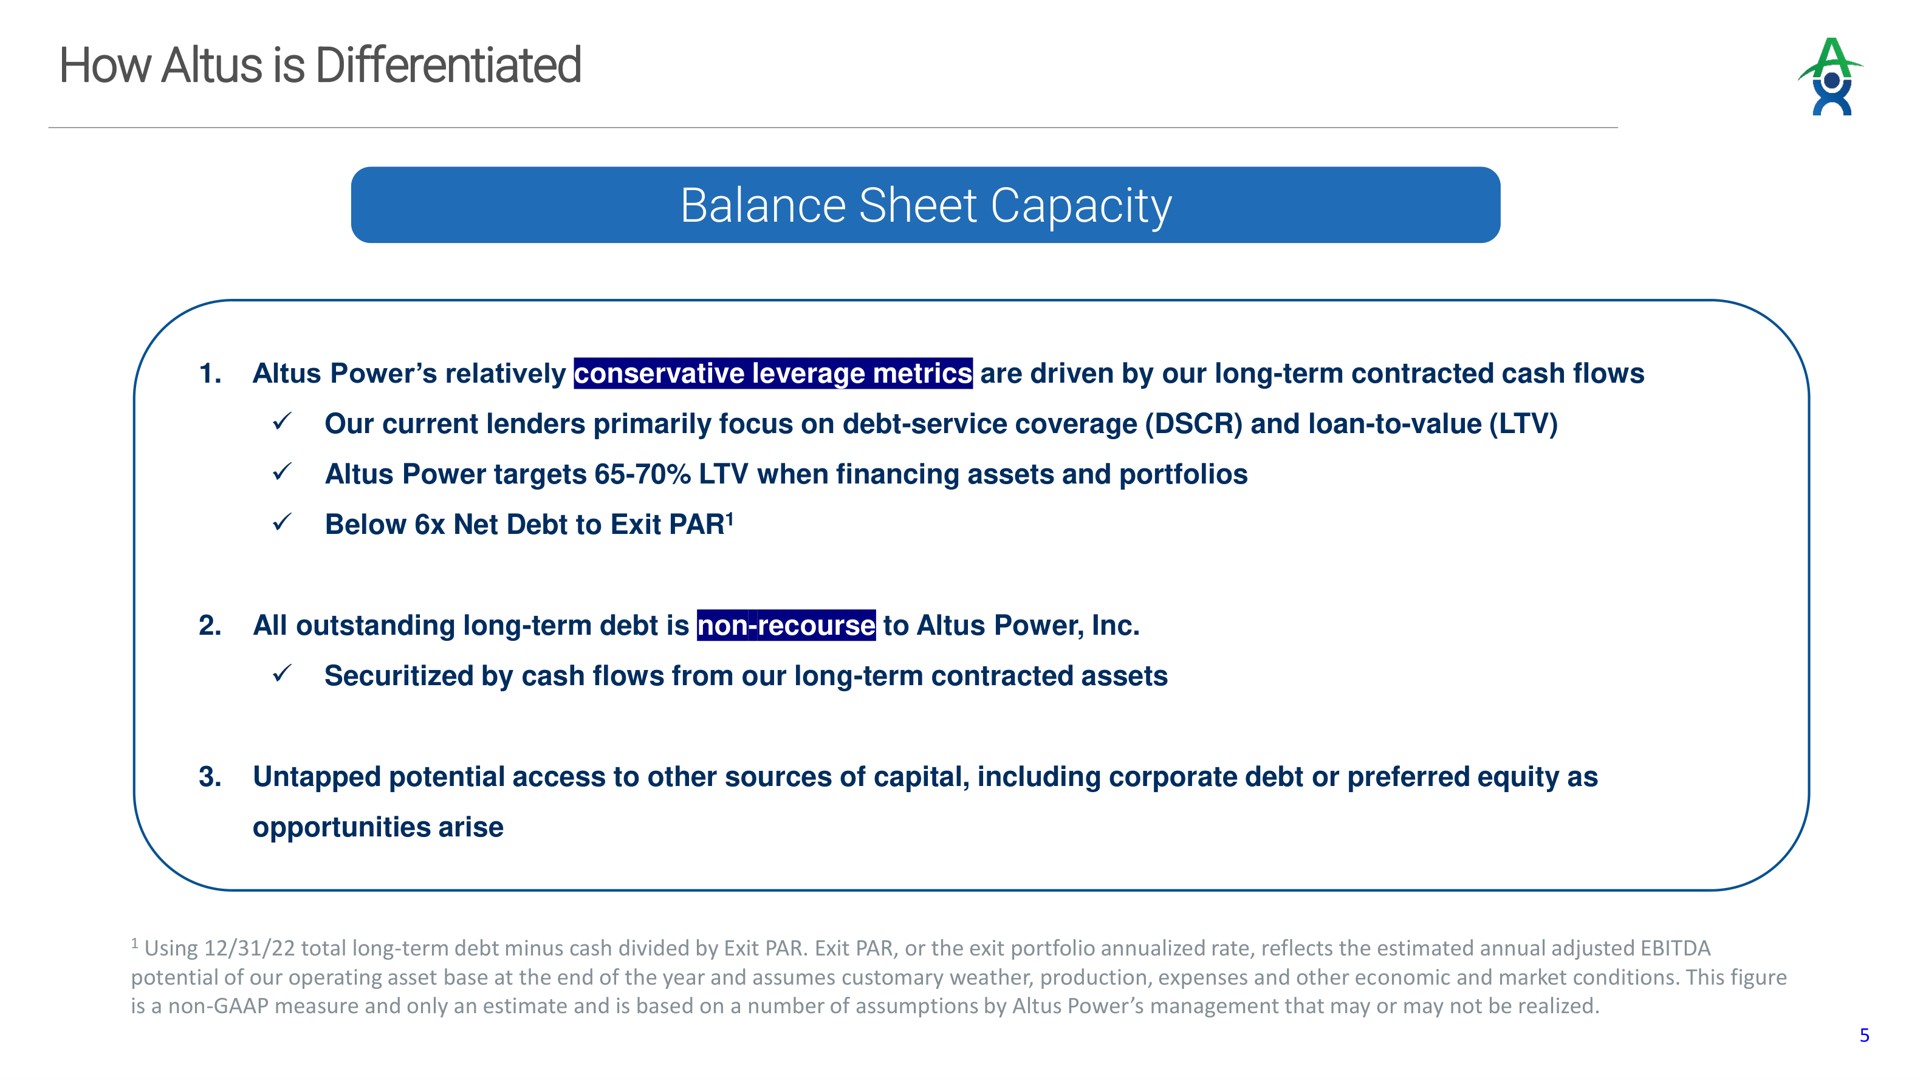 how is differentiated balance sheet capacity | Altus Power